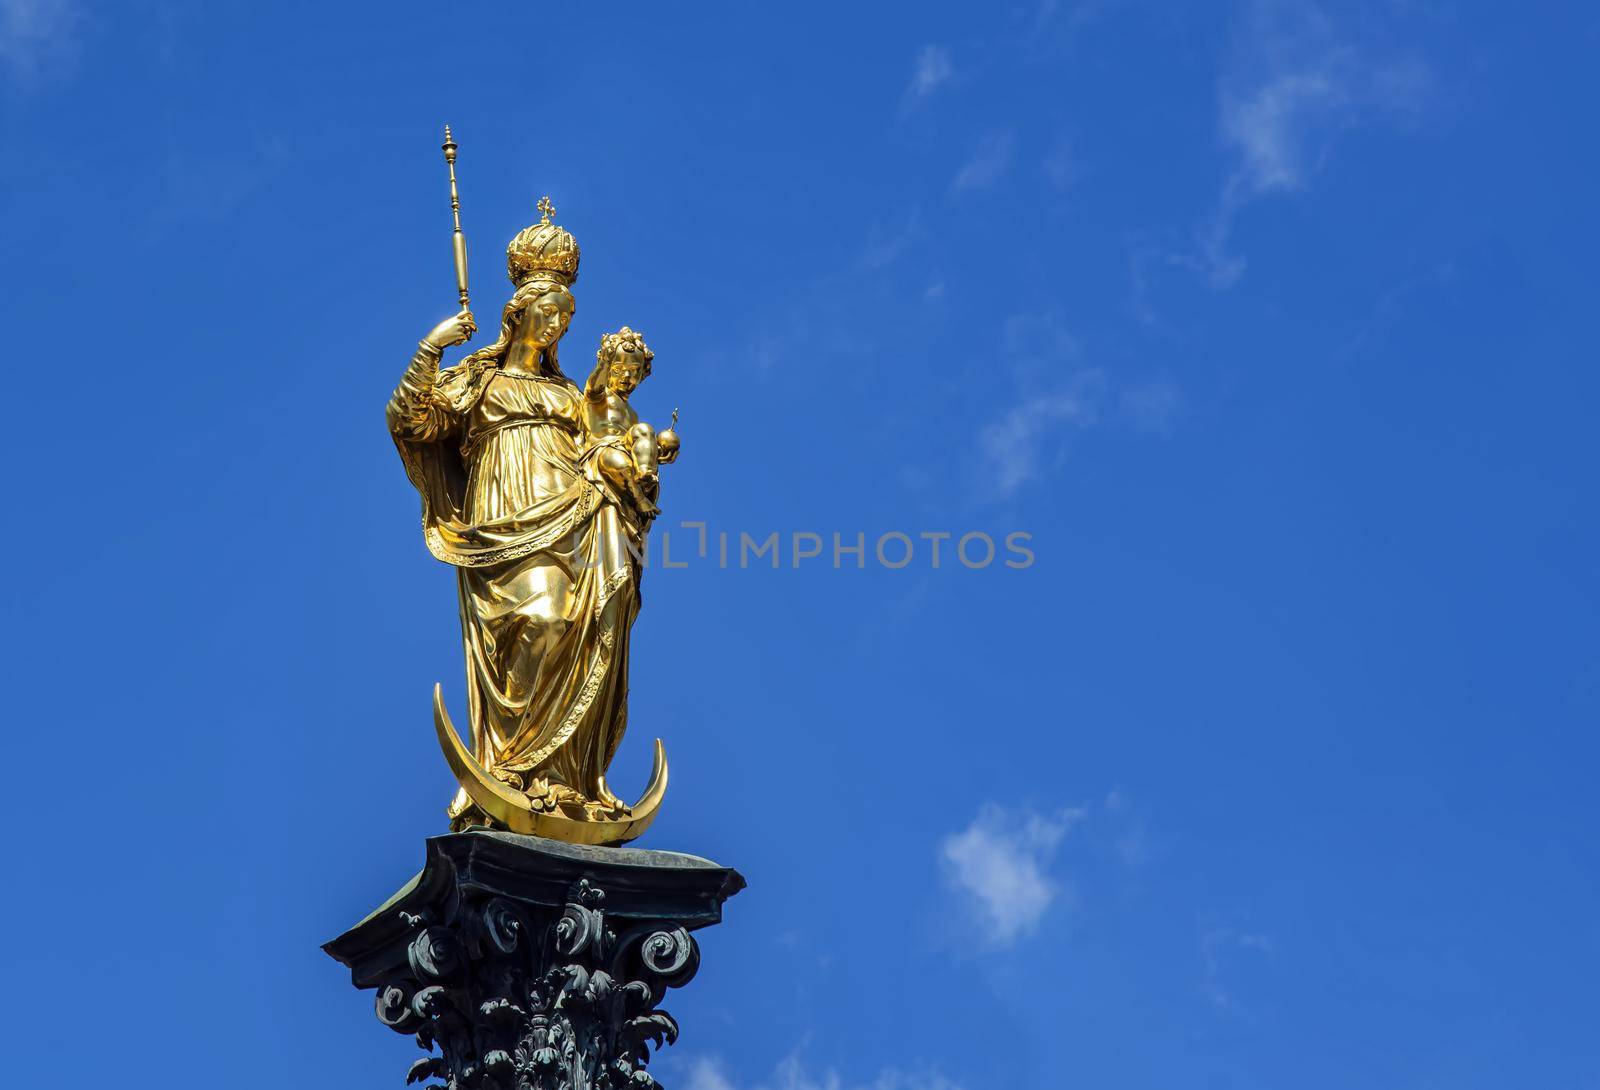 The statue of the Mariensäule on Marienplatz in Munich. The Mariensäule is a golden colored statue depicting the Madonna and Child Jesus standing on a crescent moon by rarrarorro